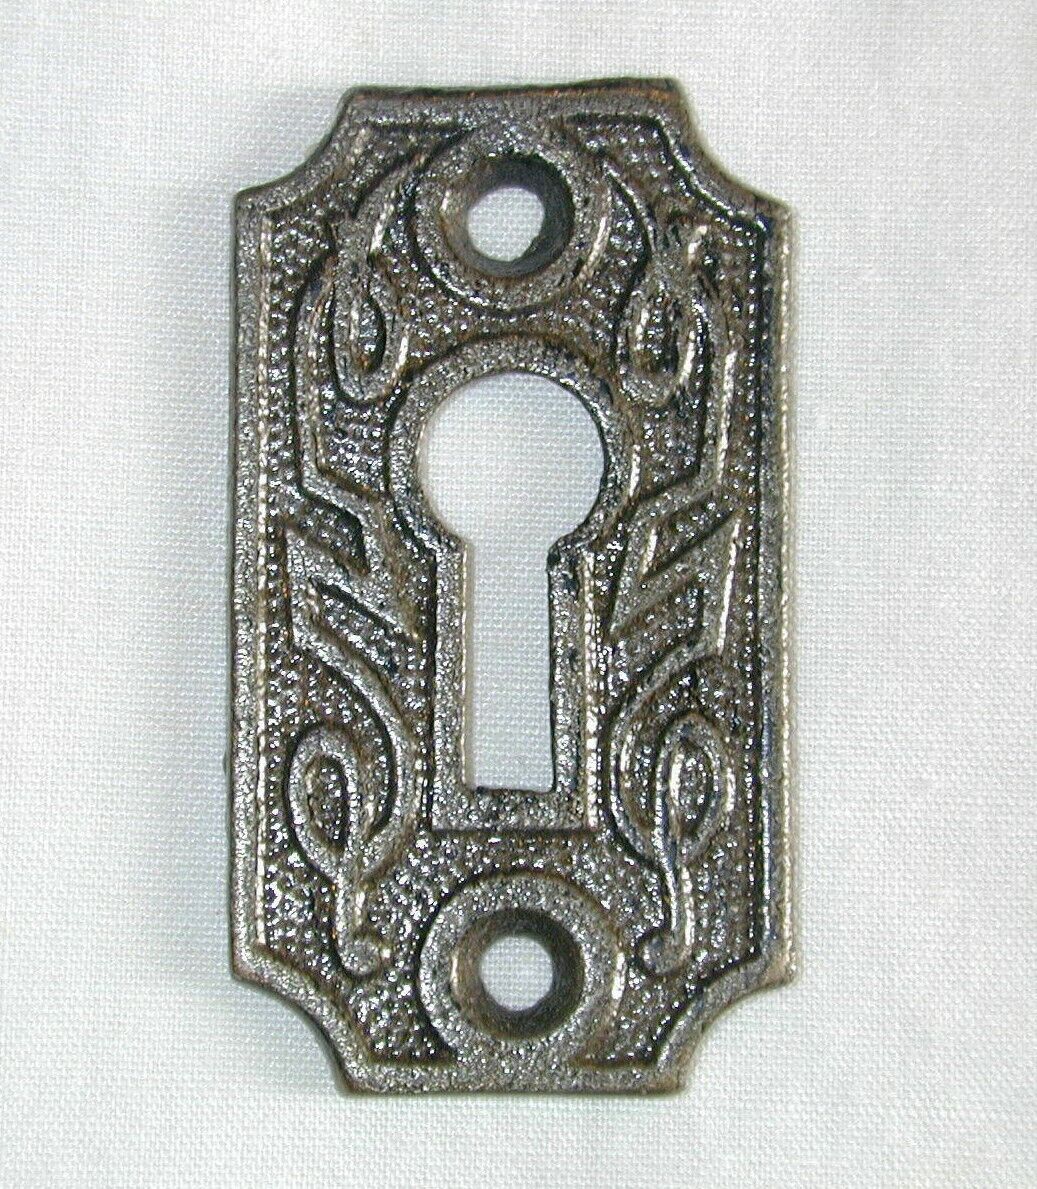 ANTIQUE ORNATE BRASS KEY HOLE COVER